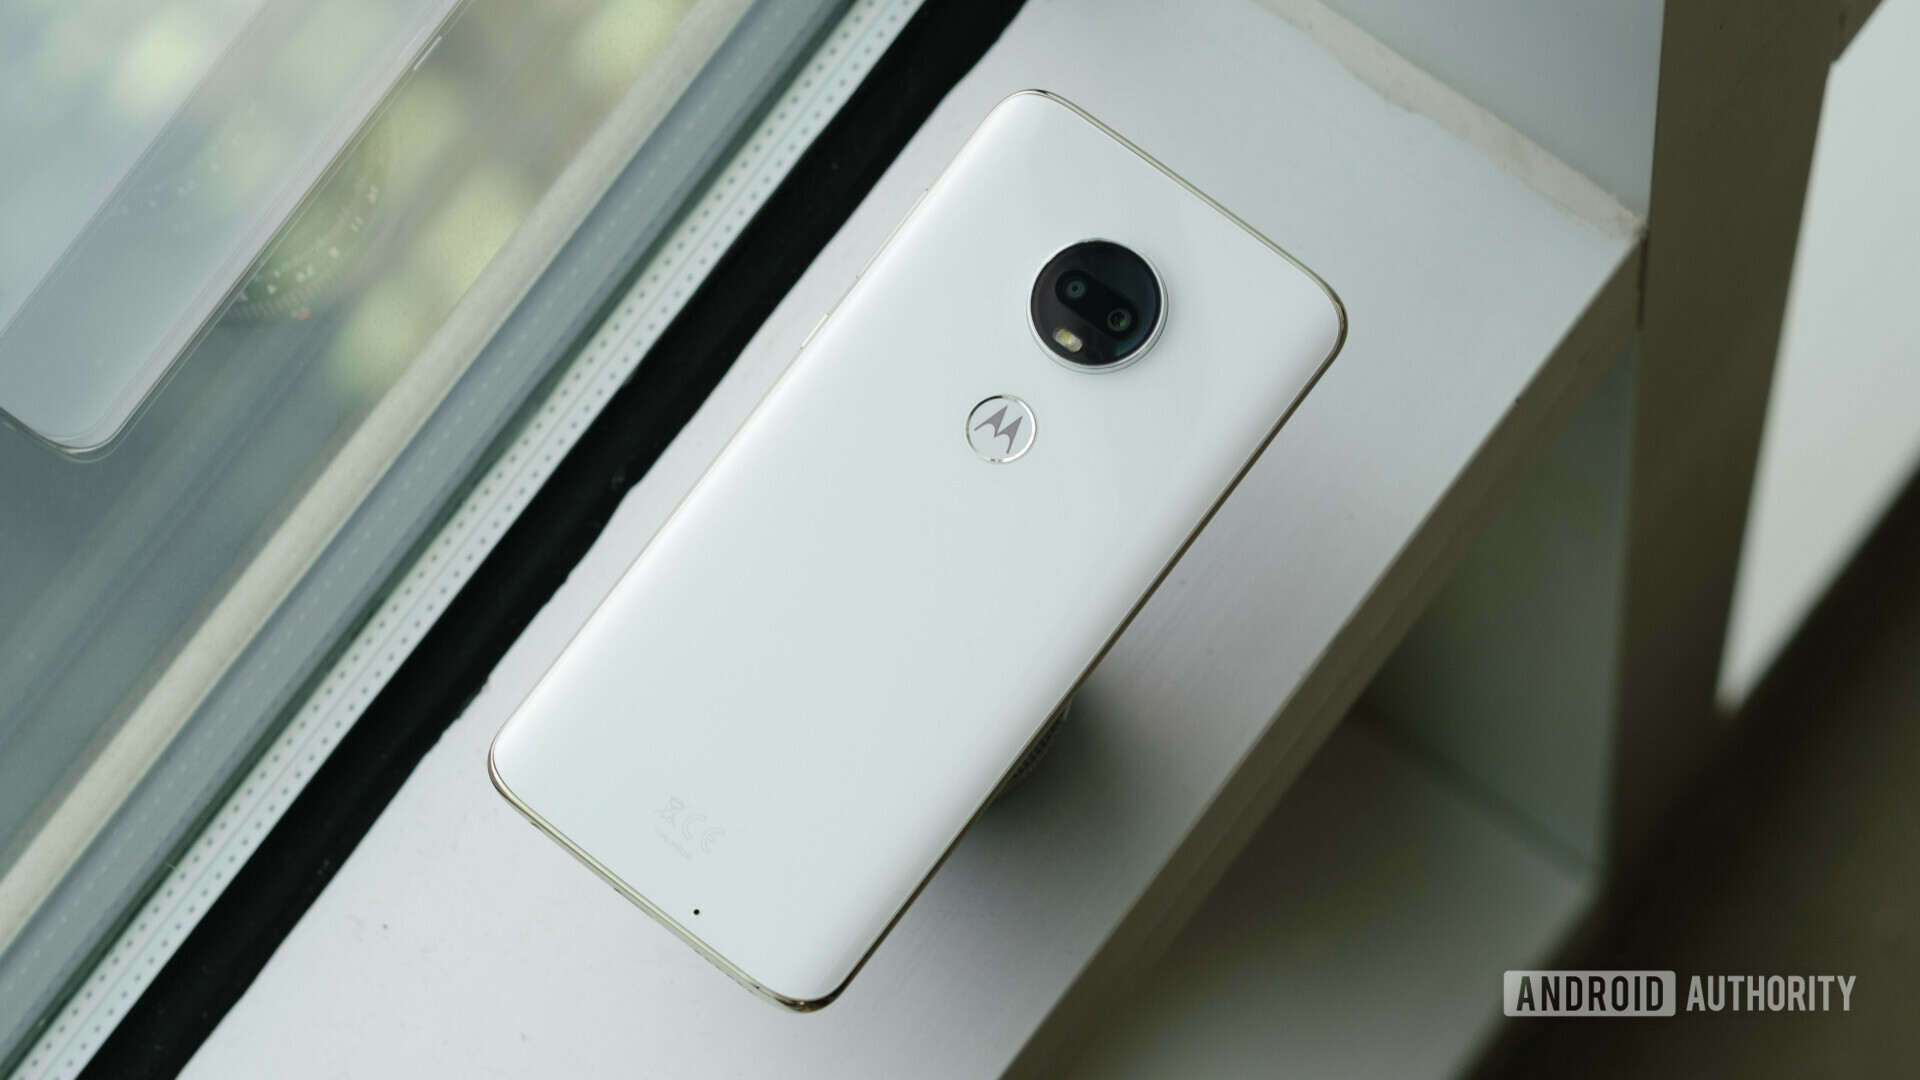 The Moto G7 in white on a window ledge.